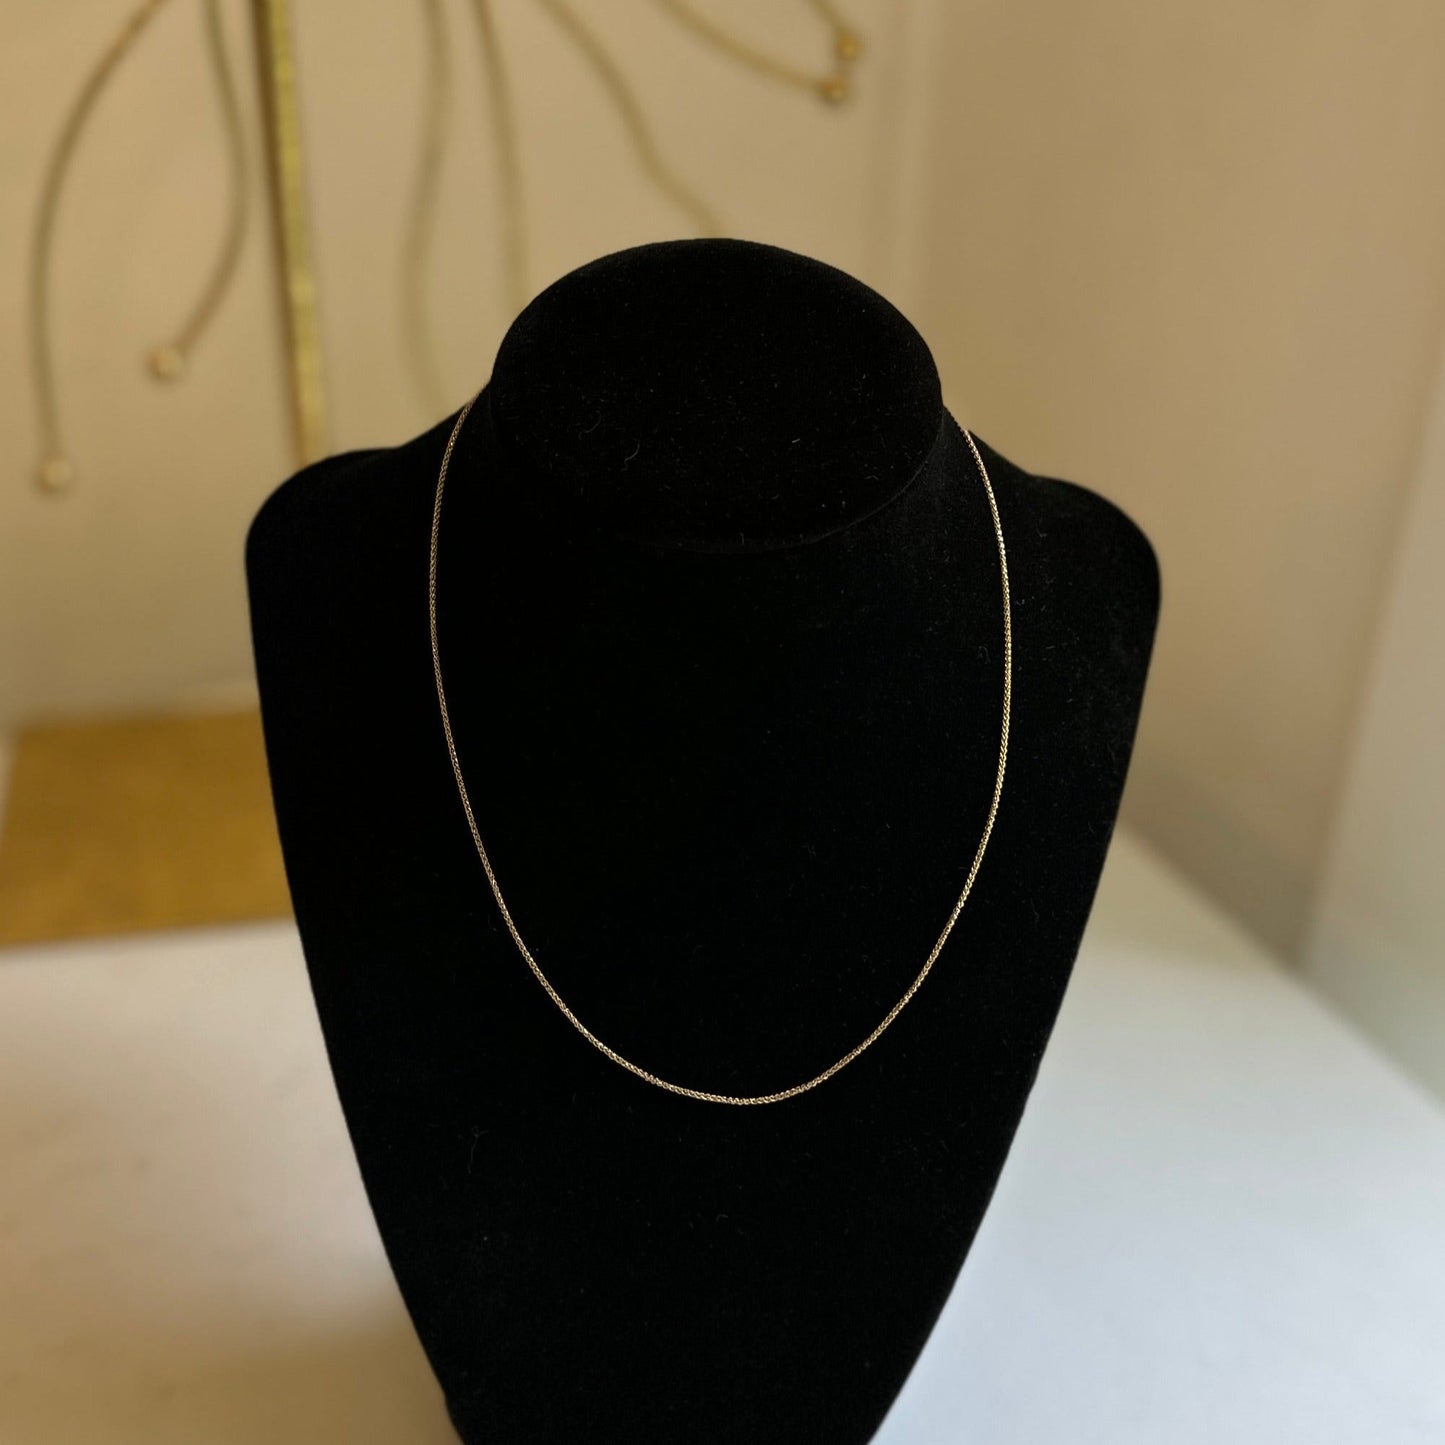 18KT Yellow Gold 1mm Spiga Chain Necklace